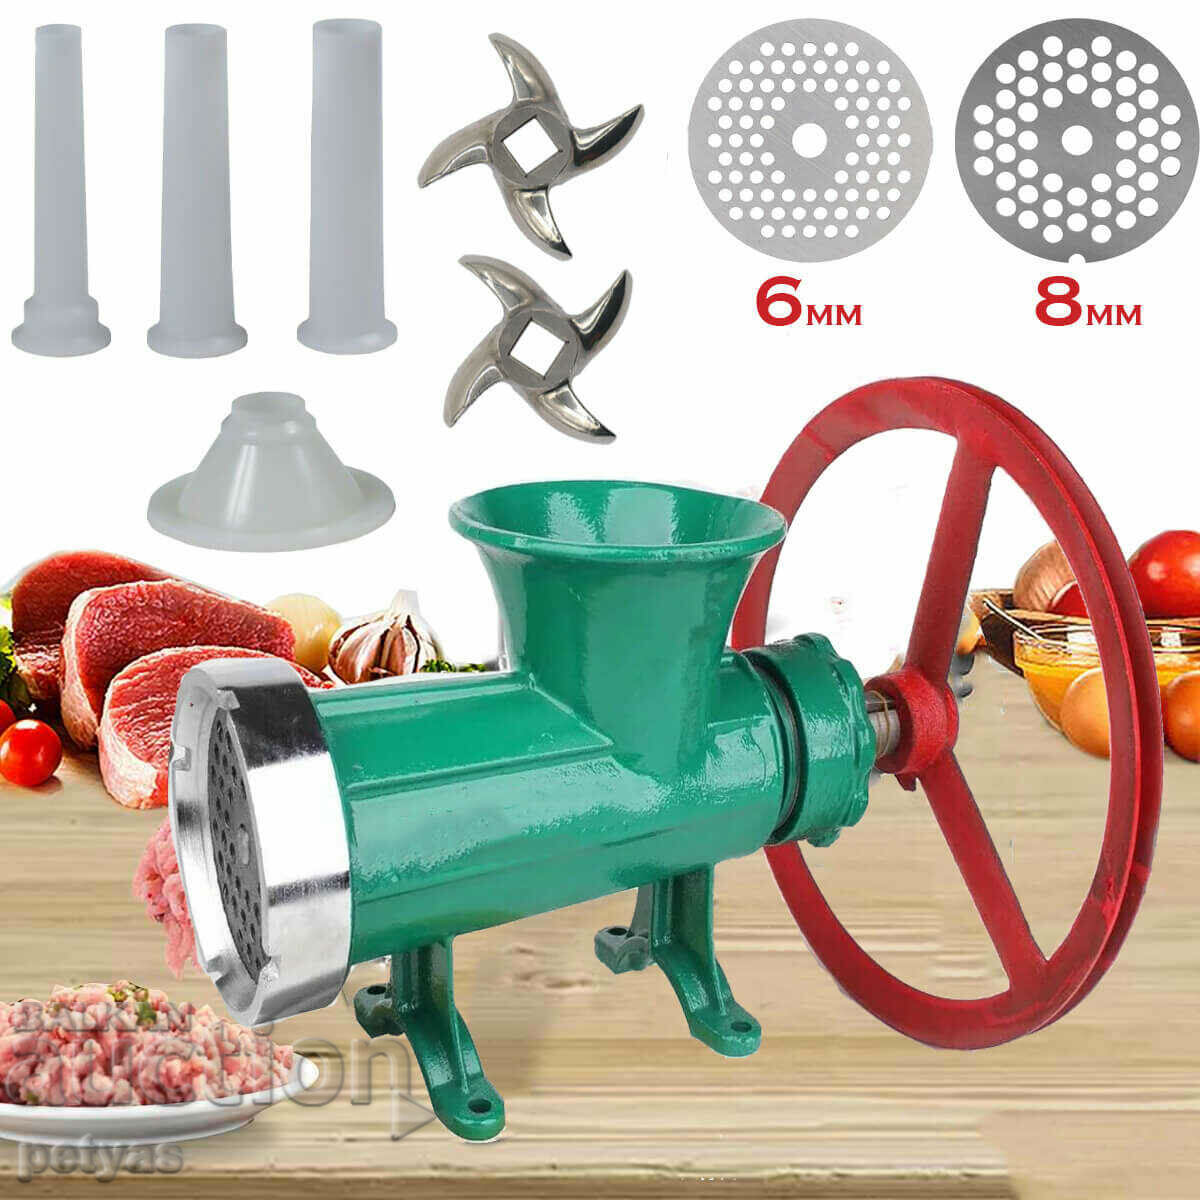 Cast iron meat grinder for minced meat No. 32 - Romania